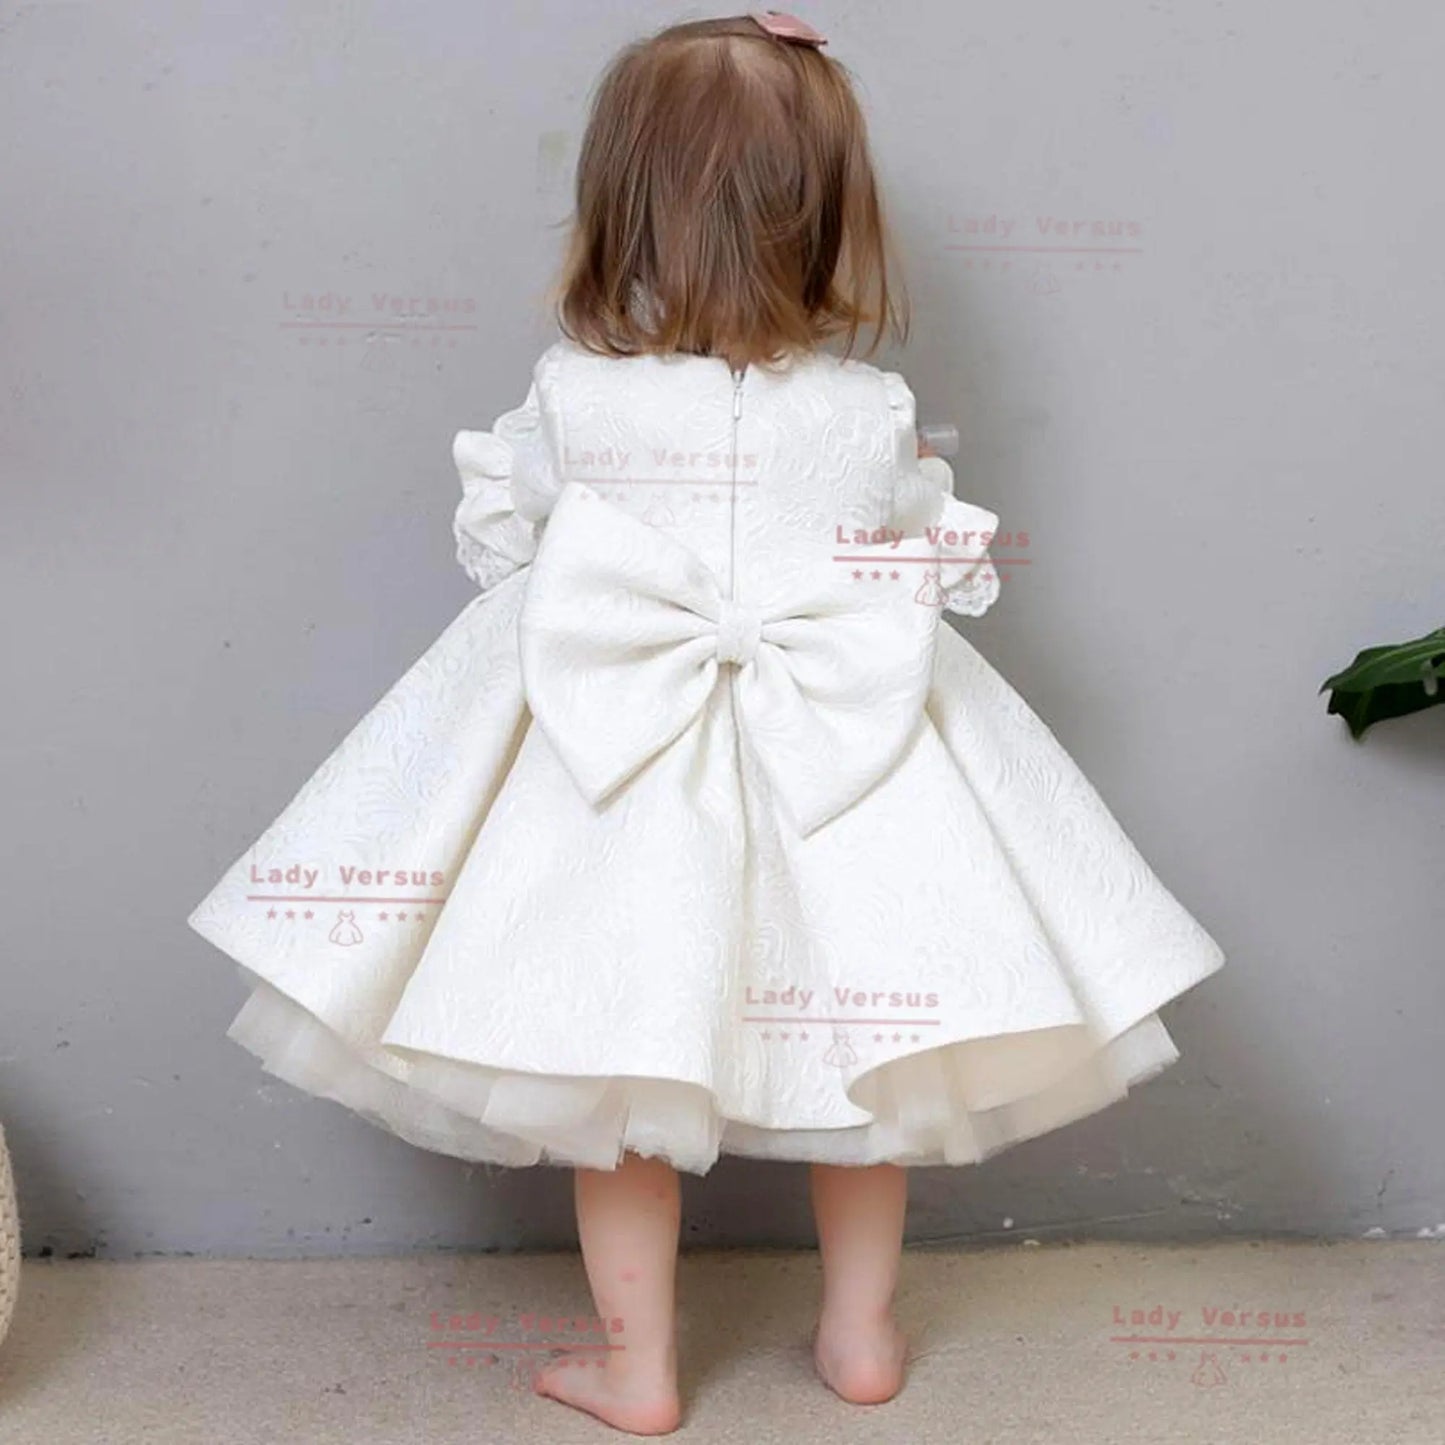 Off white dress with flowers belt Dress /Baby Girl Christening Gown/ Baby Girl Baptism Outfit/ birthday princess gown / toddler dress Lady Versus